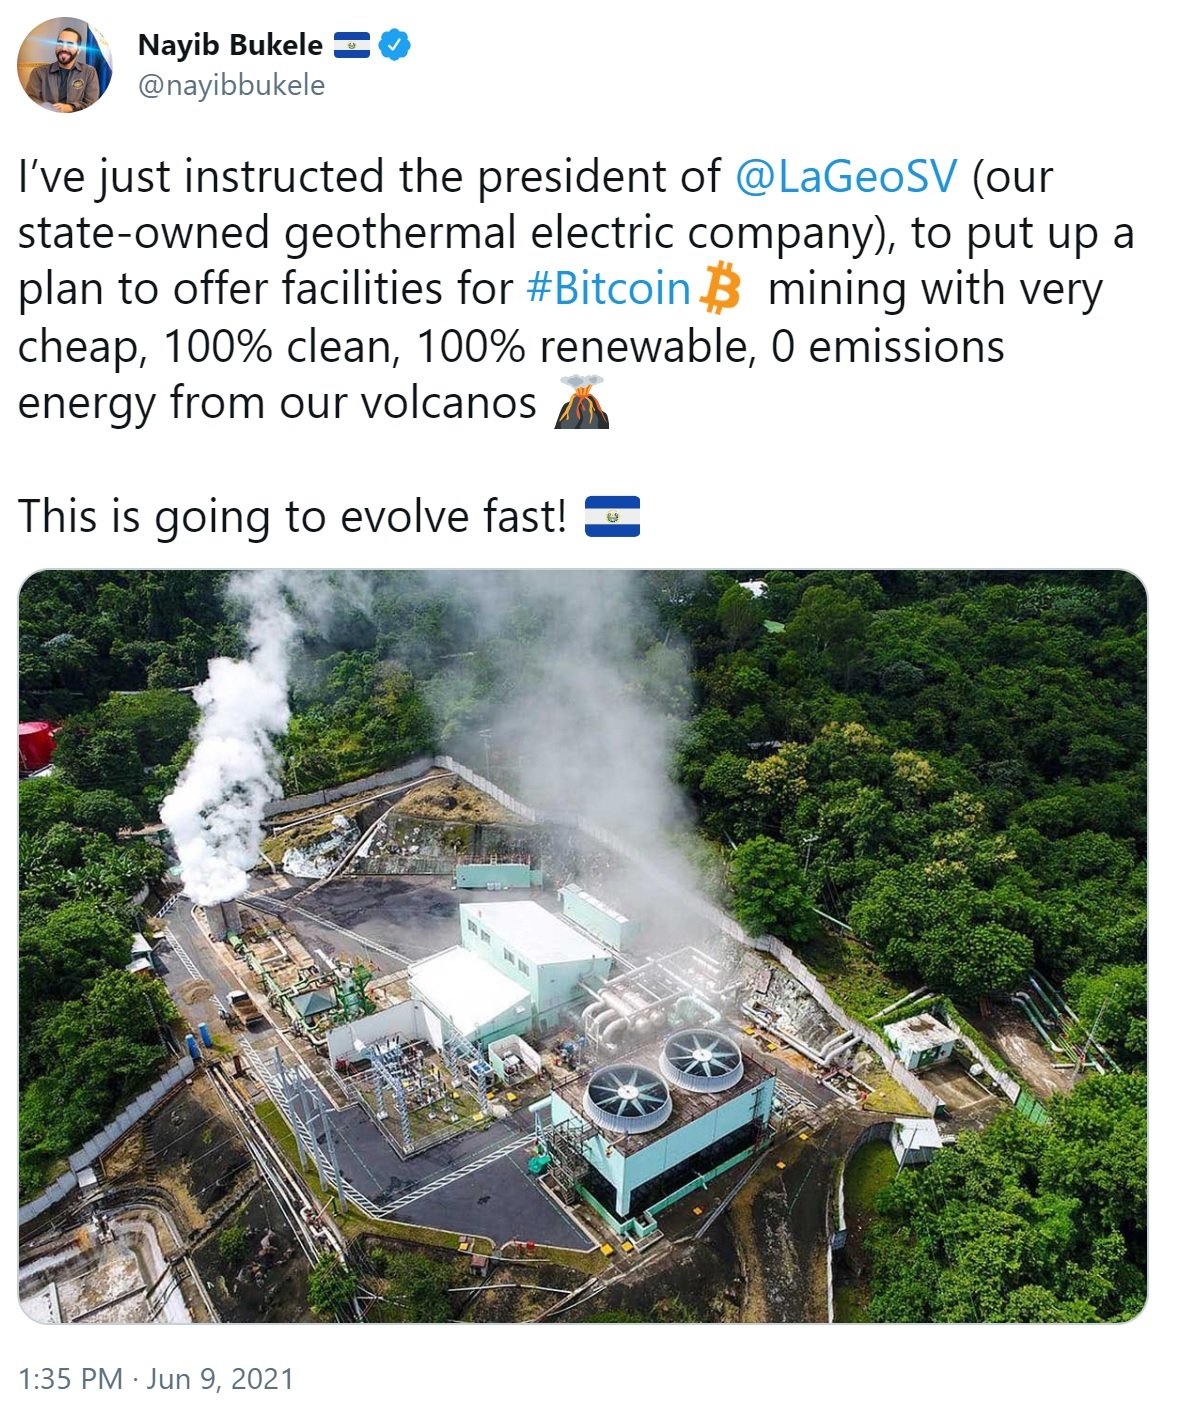 El Salvador to Mine Bitcoin With Energy From Volcanoes: '100% Clean, 100% Renewable, 0 Emissions'